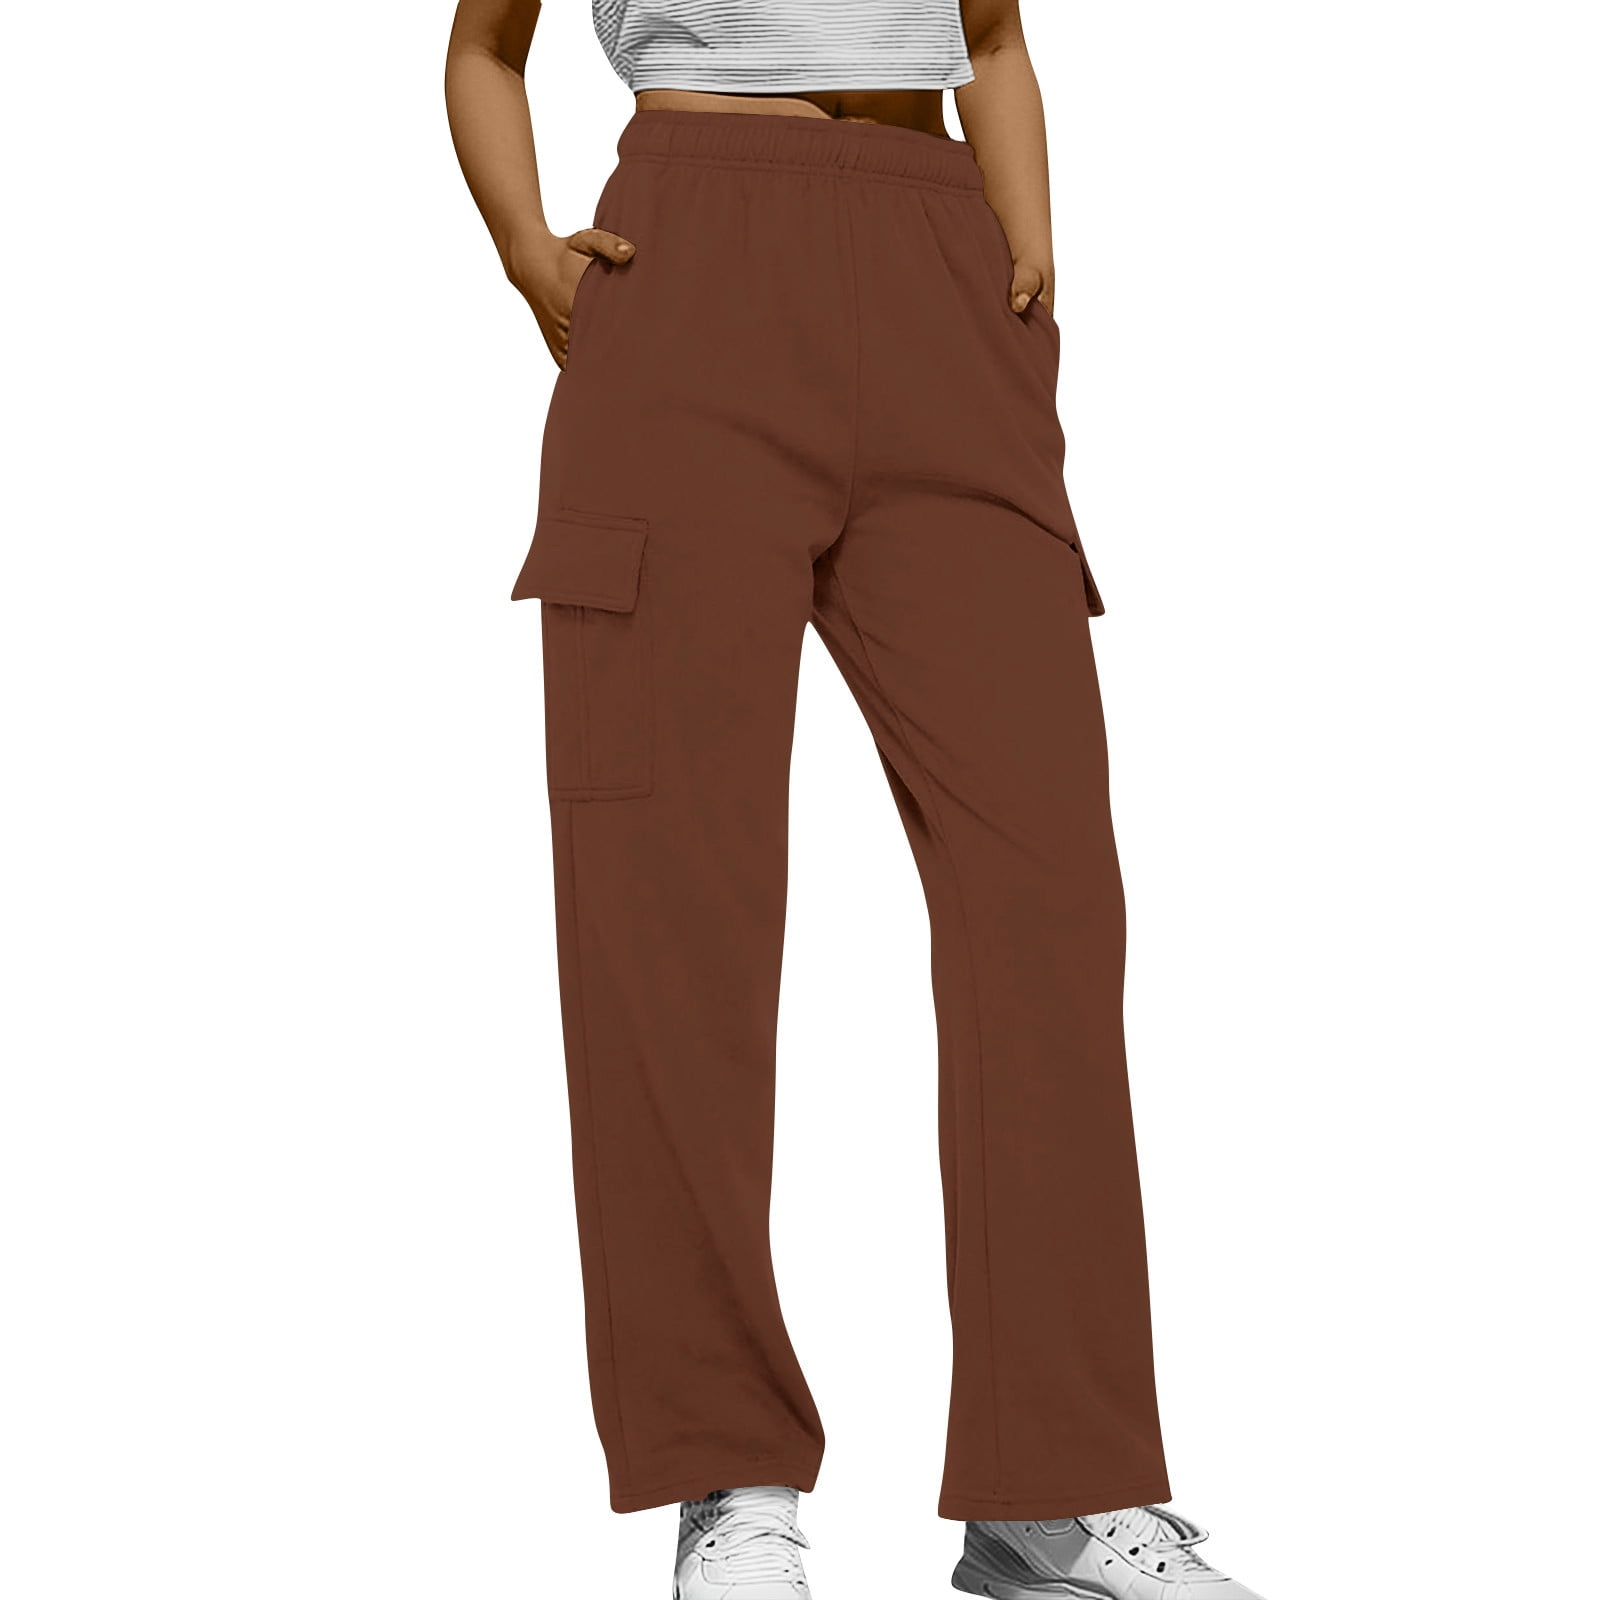 Susanny Cargo Sweatpants Joggers for Women Petite High Waisted with Pockets  Straight Leg Lounge Pants Fleece Lined Loose Fit Baggy Drawstring